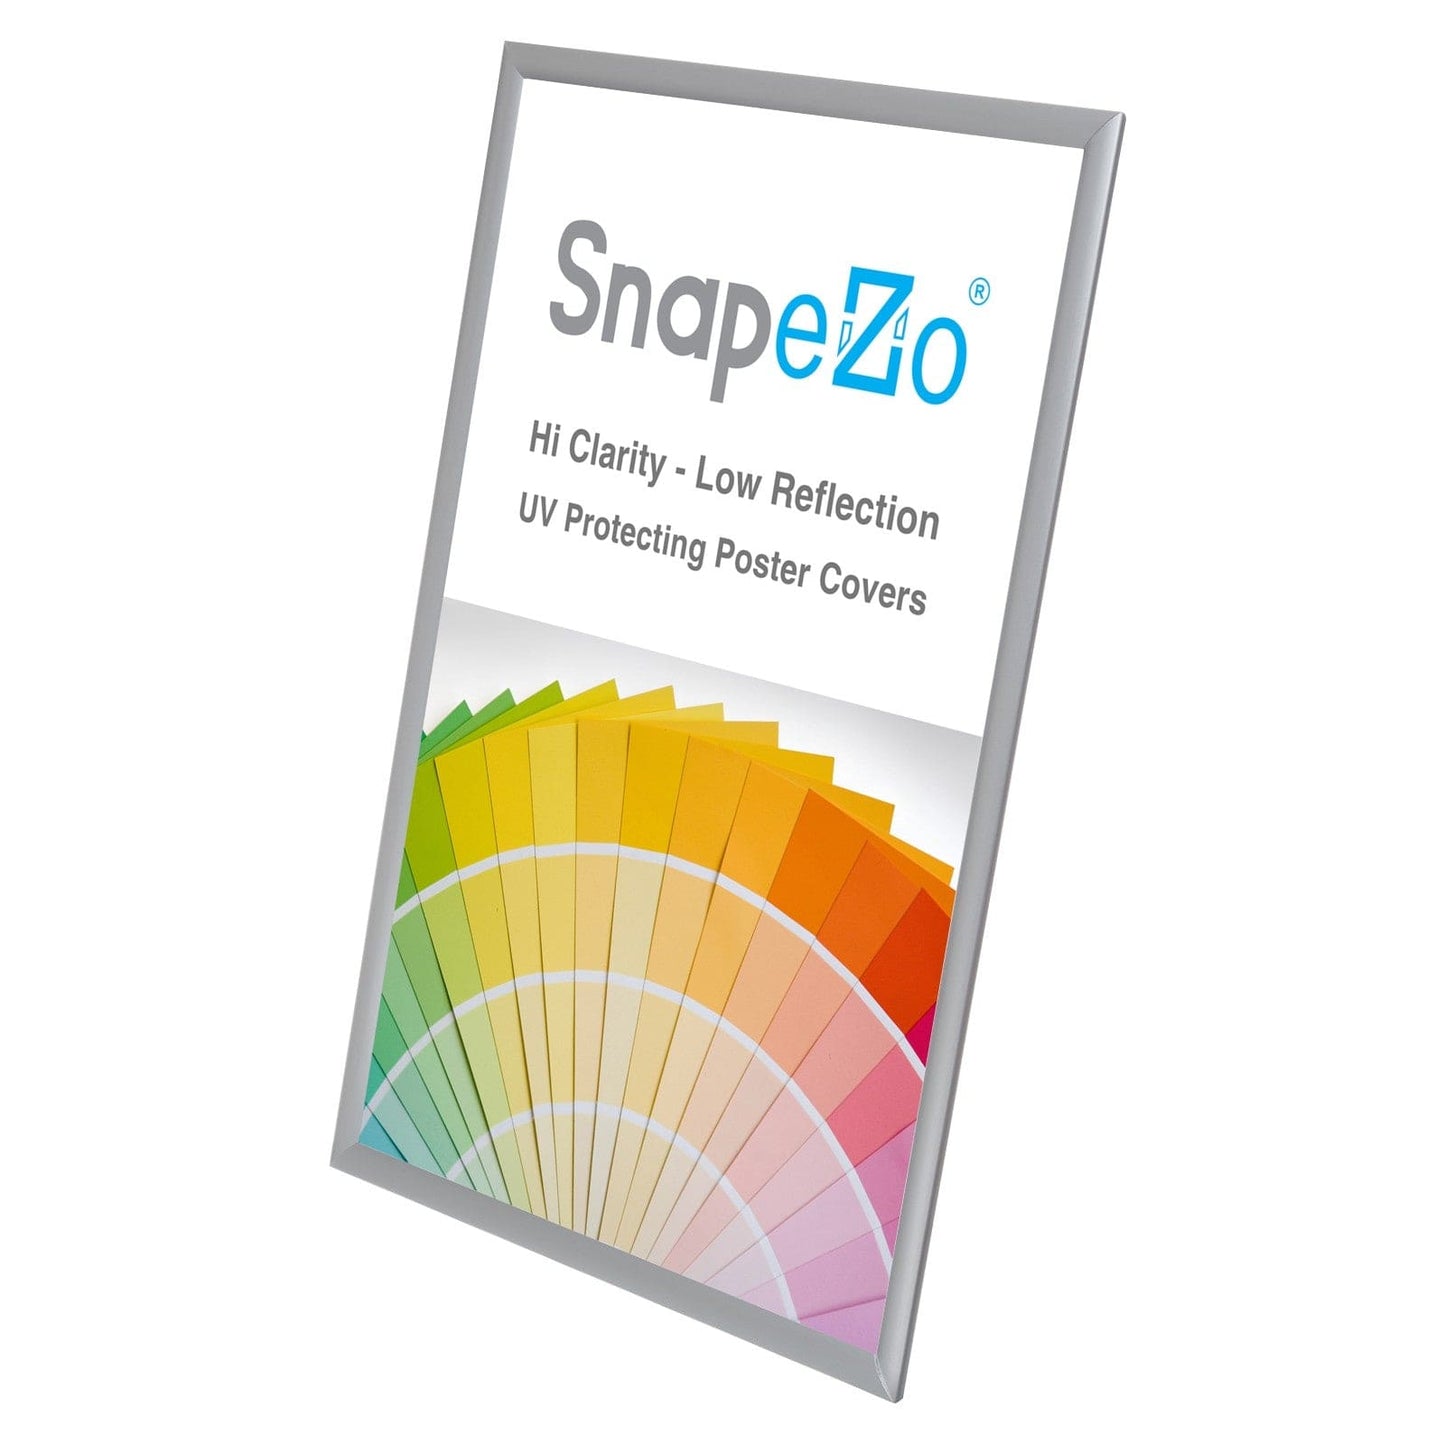 22x33 Silver SnapeZo® Poster Snap Frame 1" - Snap Frames Direct